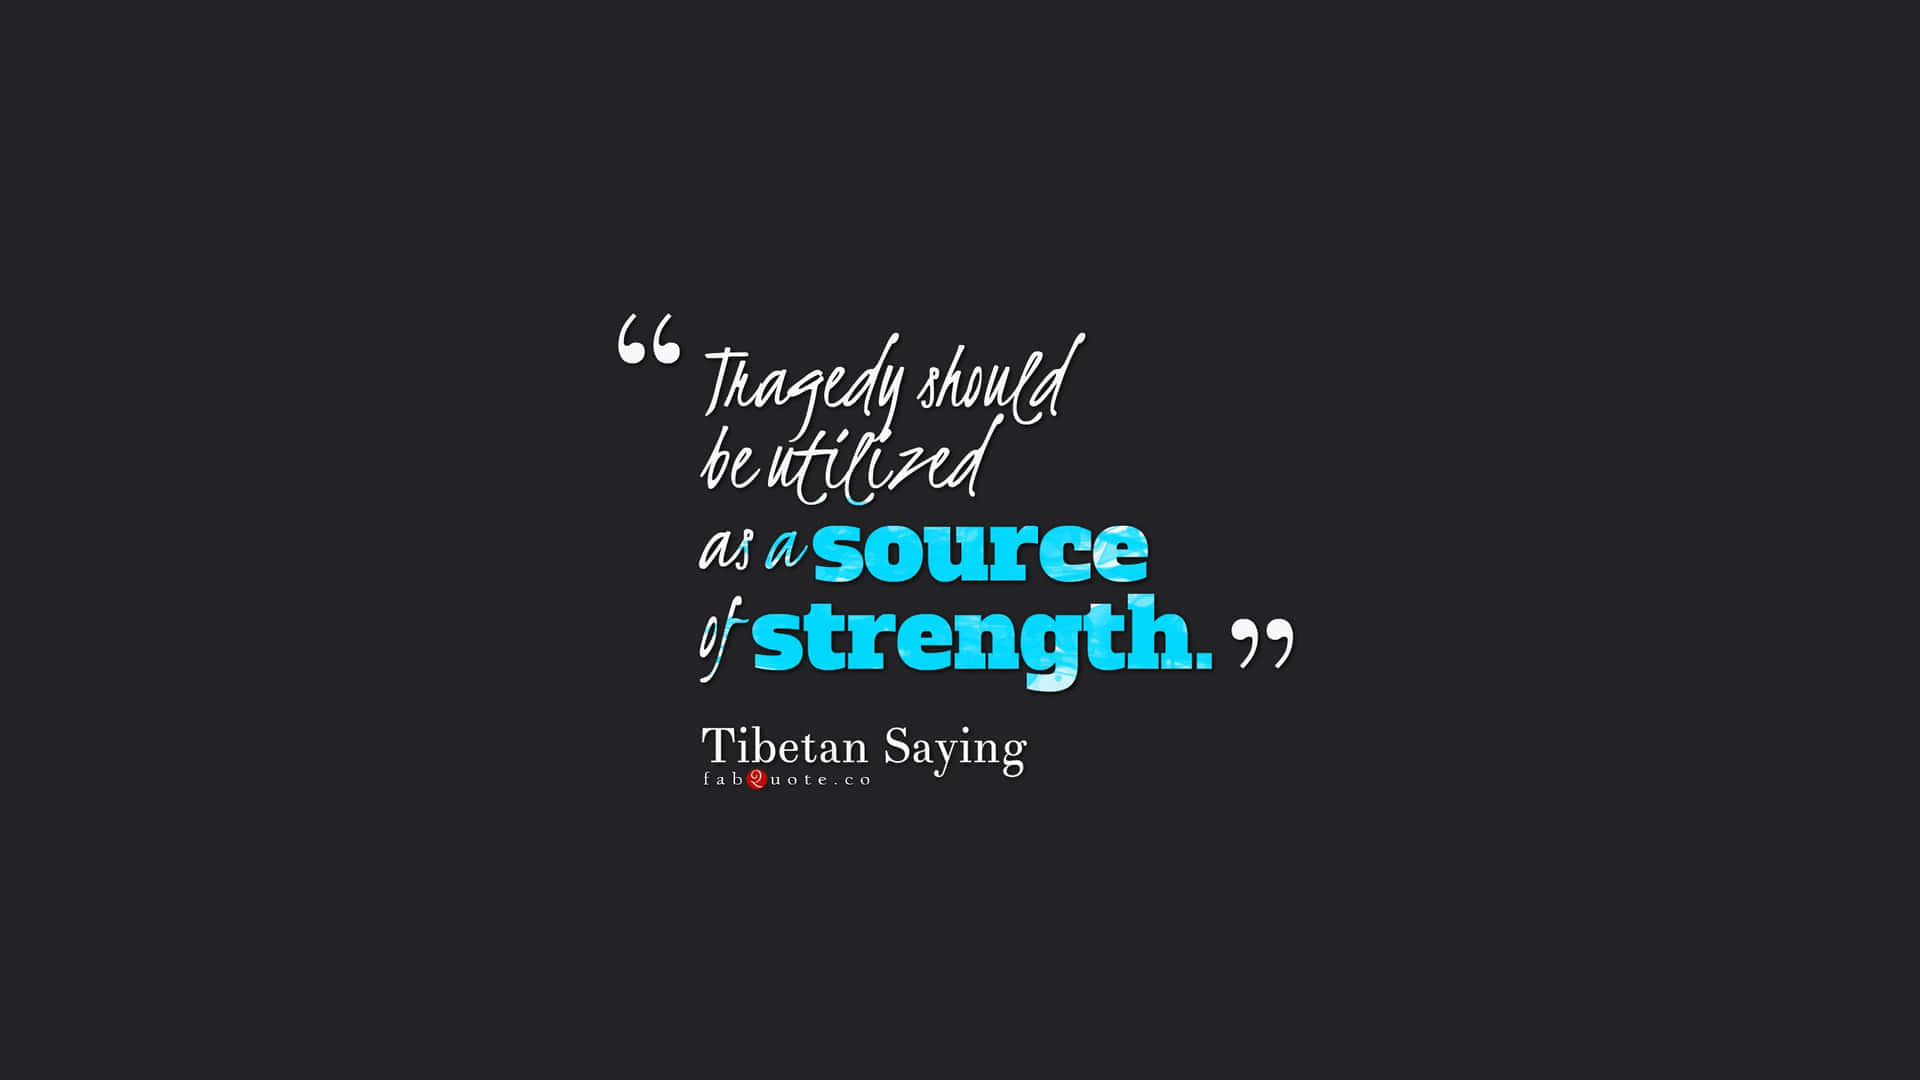 Thomas Spring Quotes - Through The Darkest Night A Source Of Strength Wallpaper